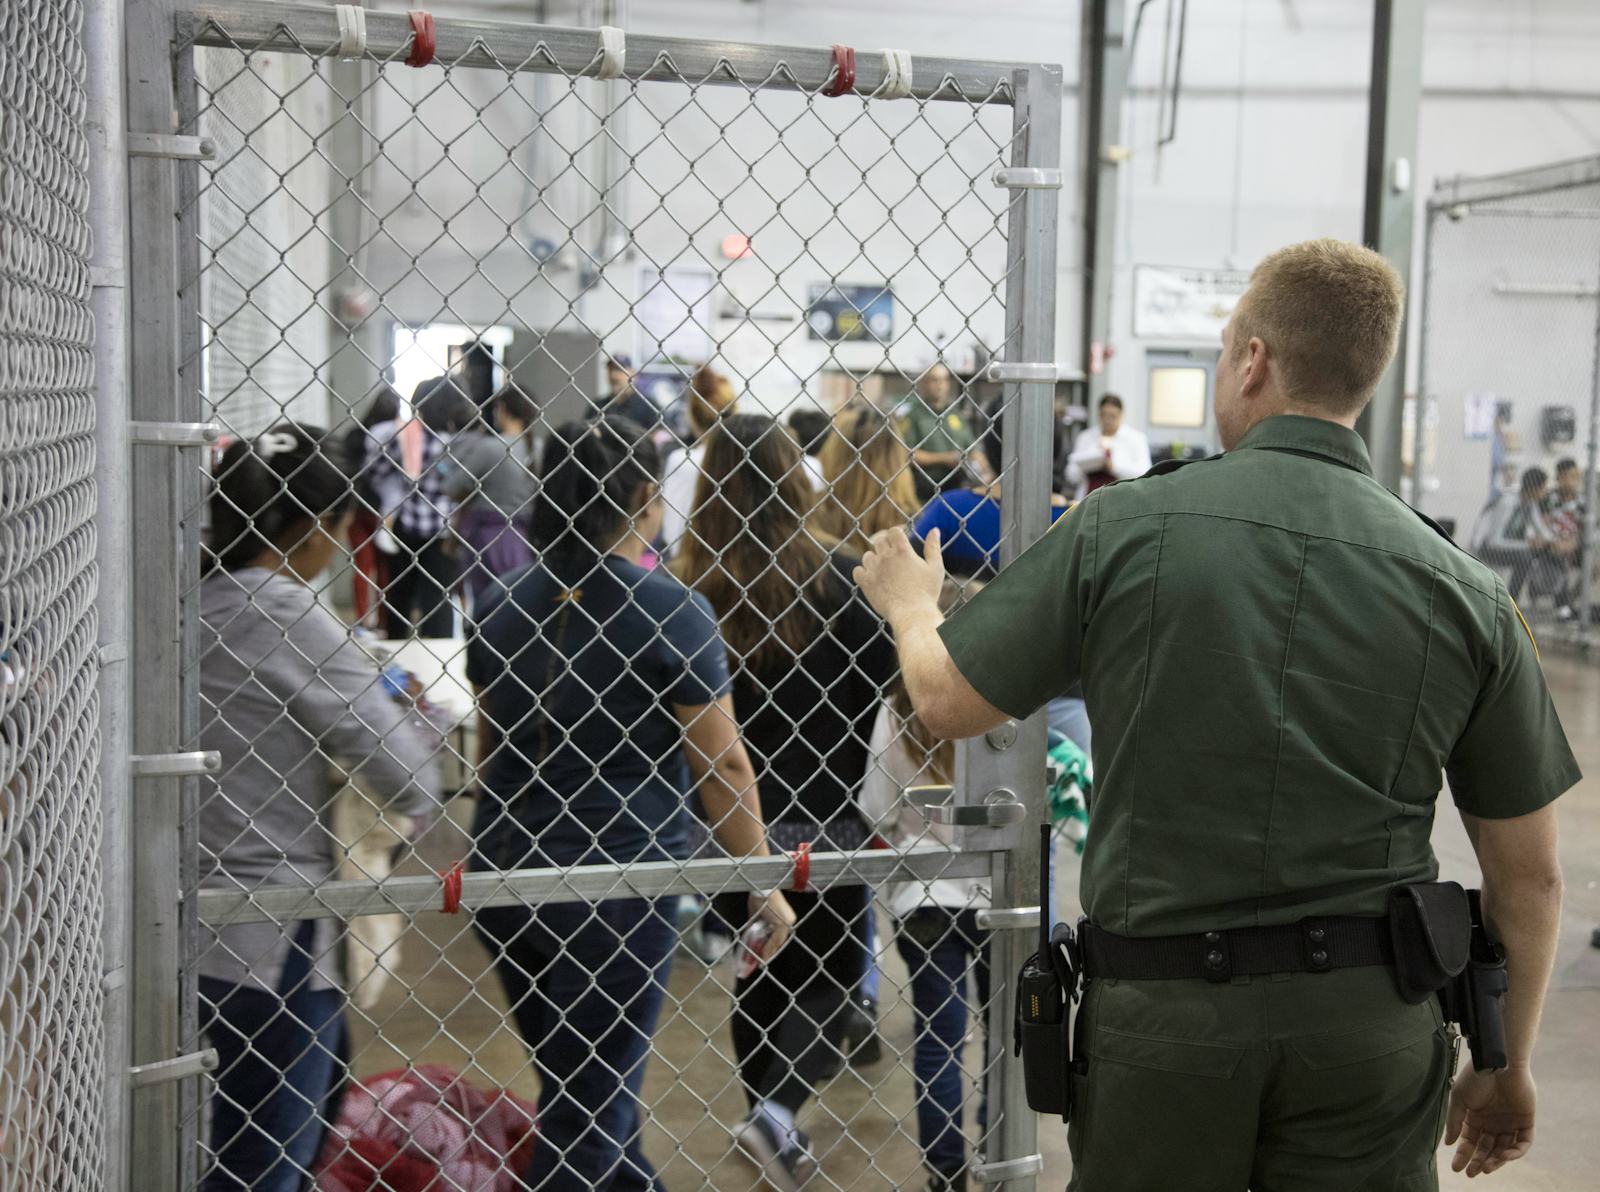 This Border Patrol Video Of Migrant Kids In Huge Cages Shows What The